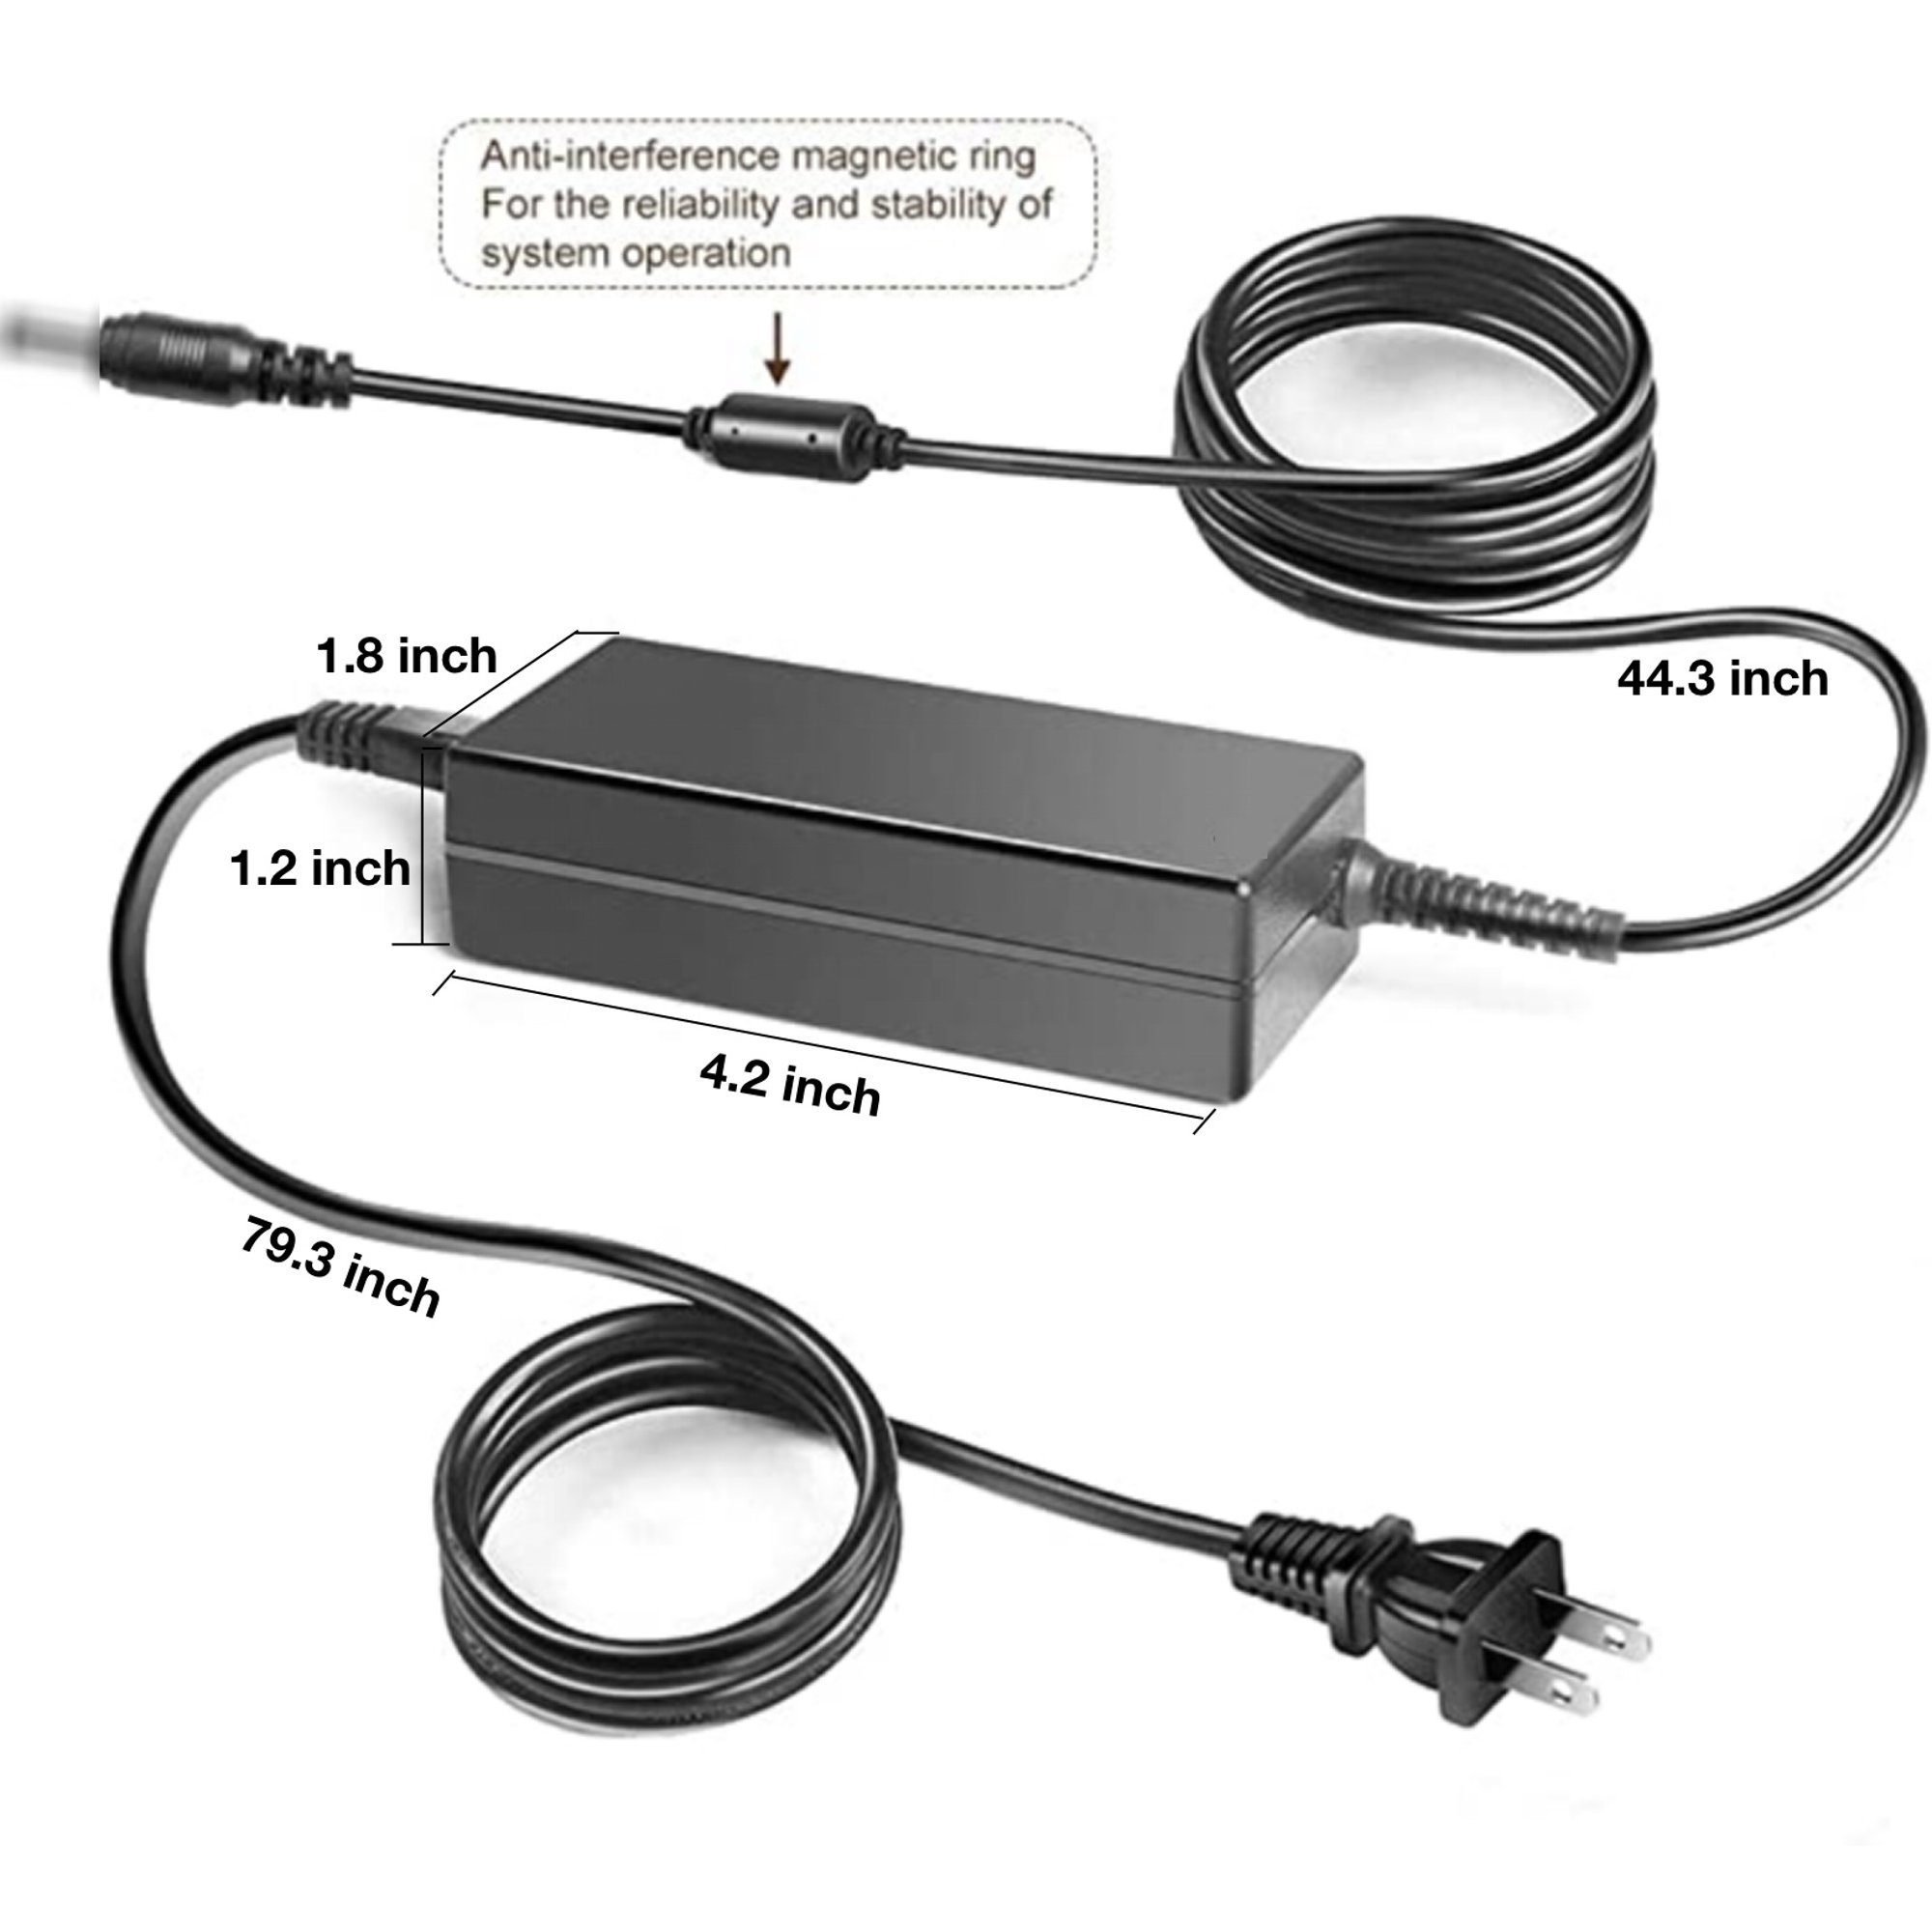 12V AC/DC Adapter For Cisco TelePresence SX20 Codec TTC7-21 CTS SX20N LITEON PWR-60W-AC PWR-60W-SX-AC Delta EADP-60KB B EADP-60KBB GPE GPE602-120500D GPE602-1205000 5A 60W Power - image 3 of 5